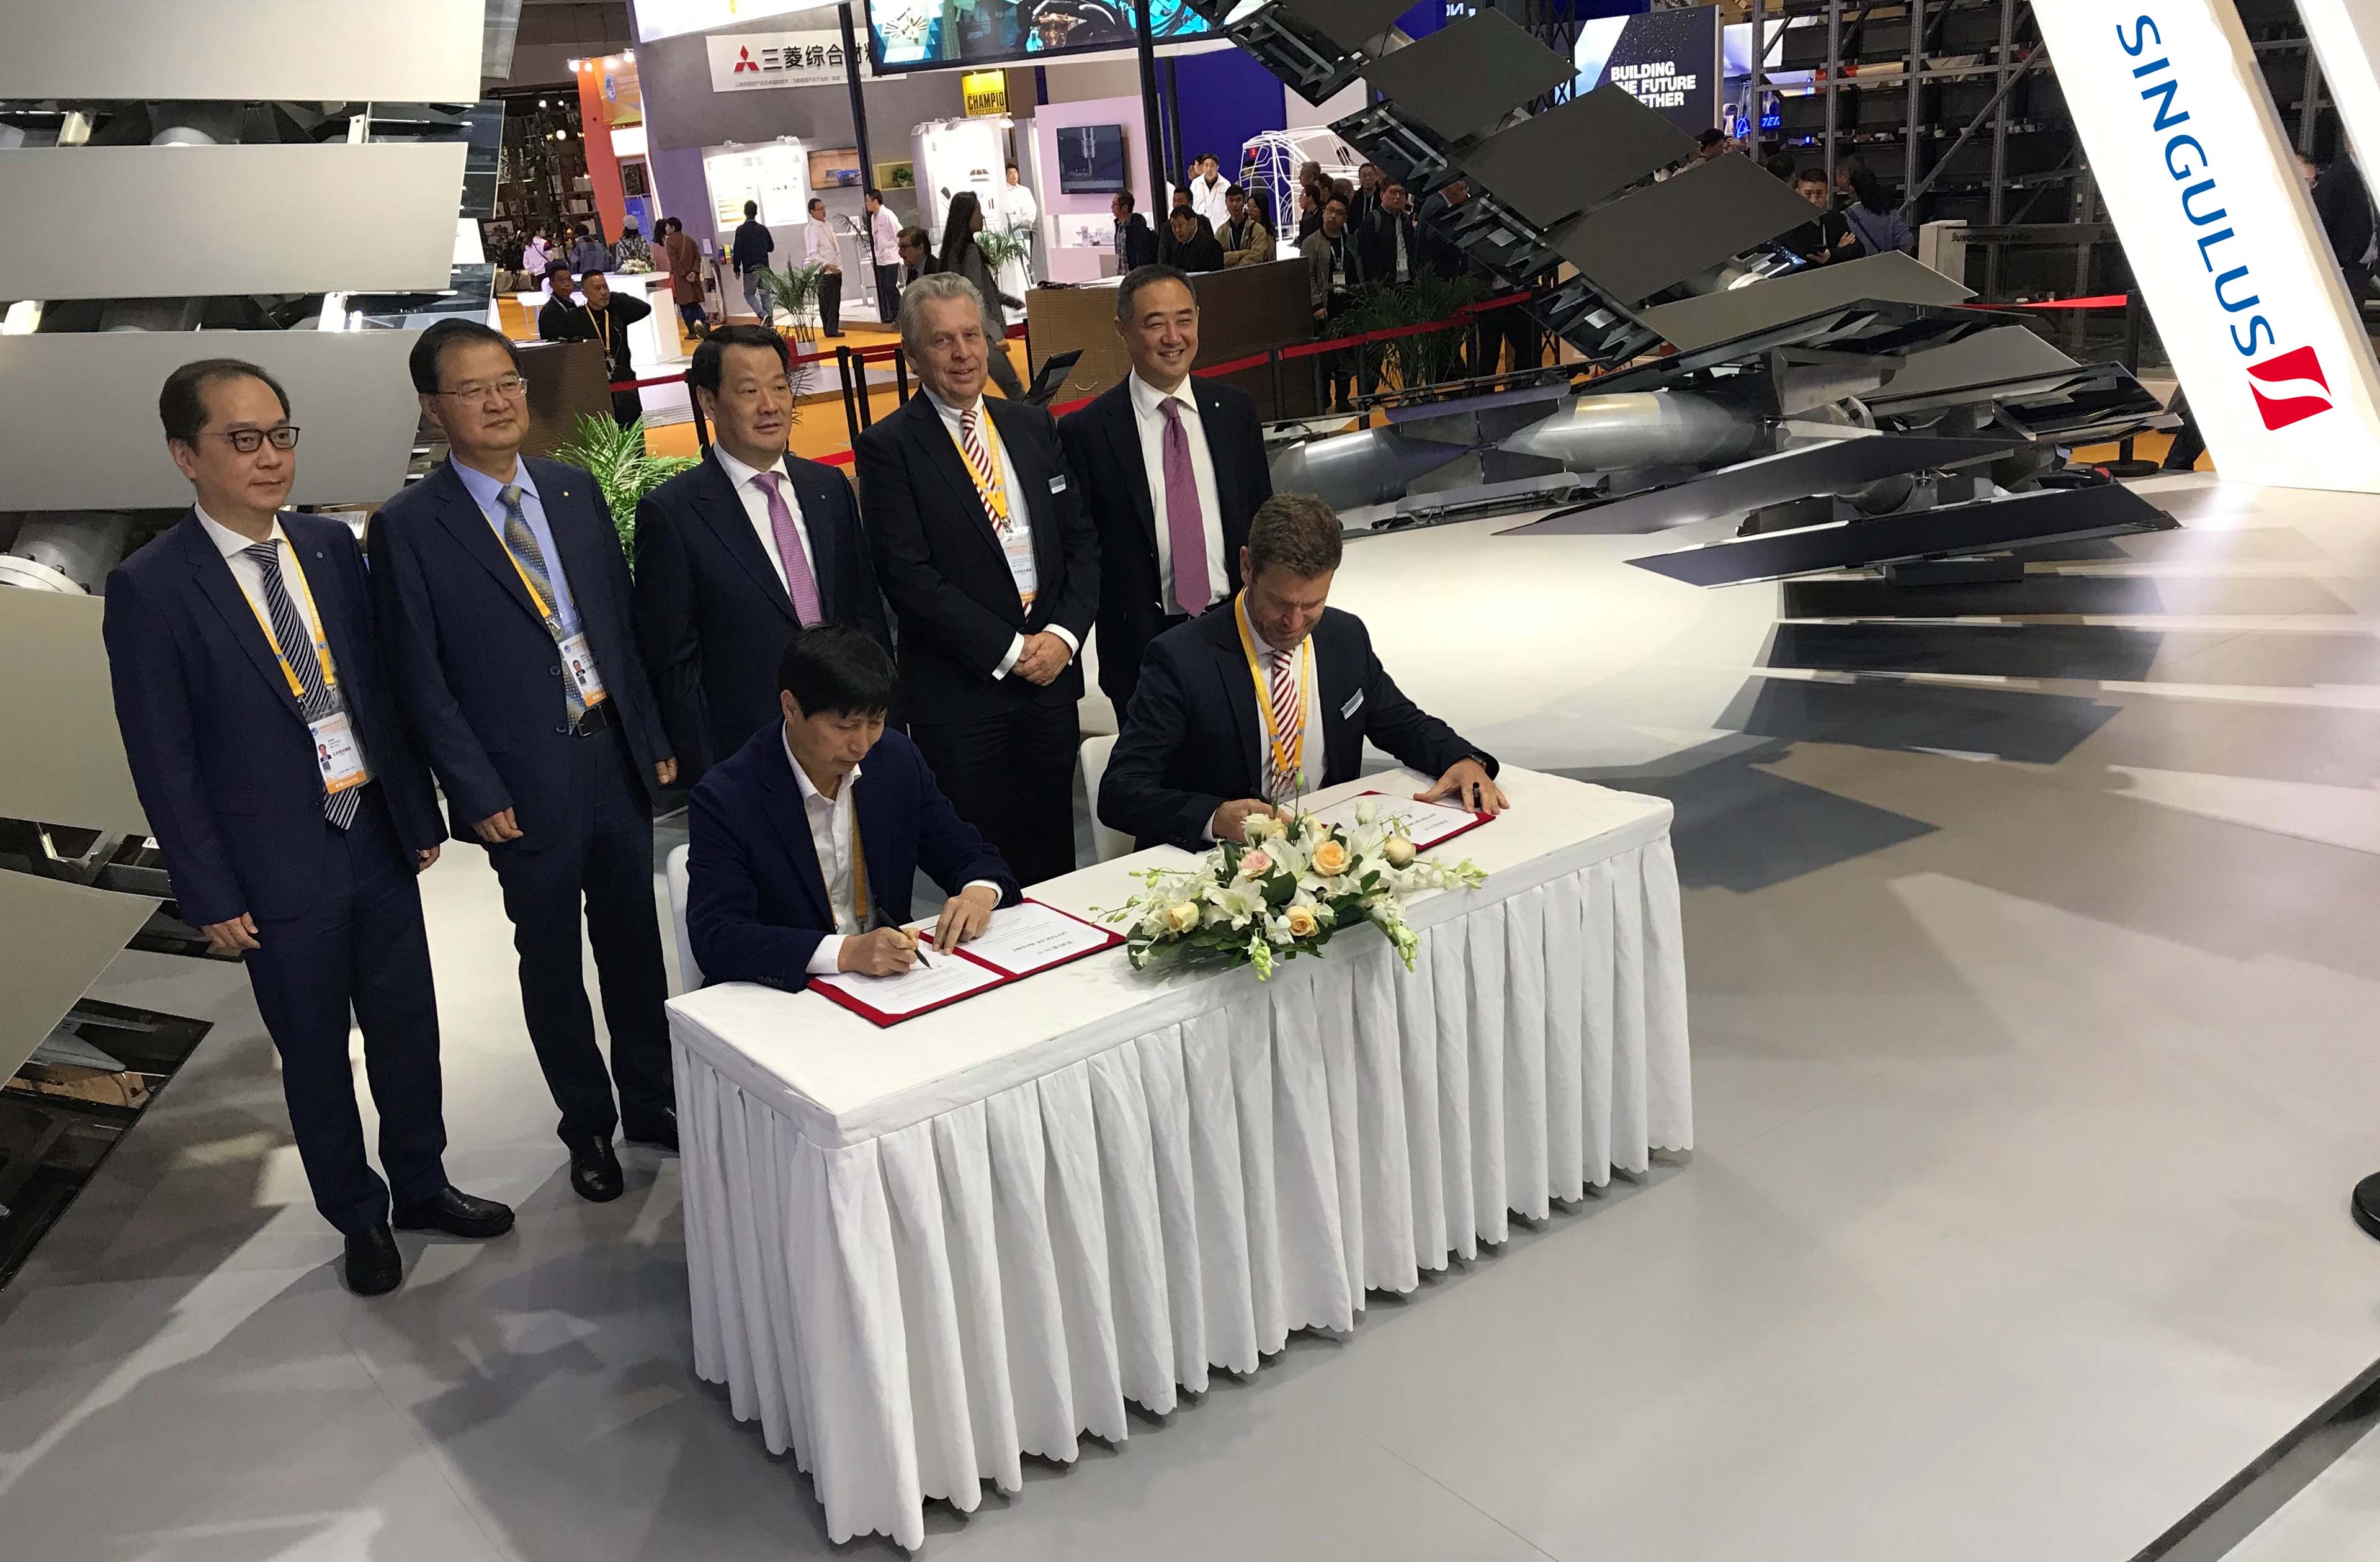 SINGULUS TECHNOLOGIES AG: Signing Ceremony during the Chinese Trade Fair CIIE in Shanghai